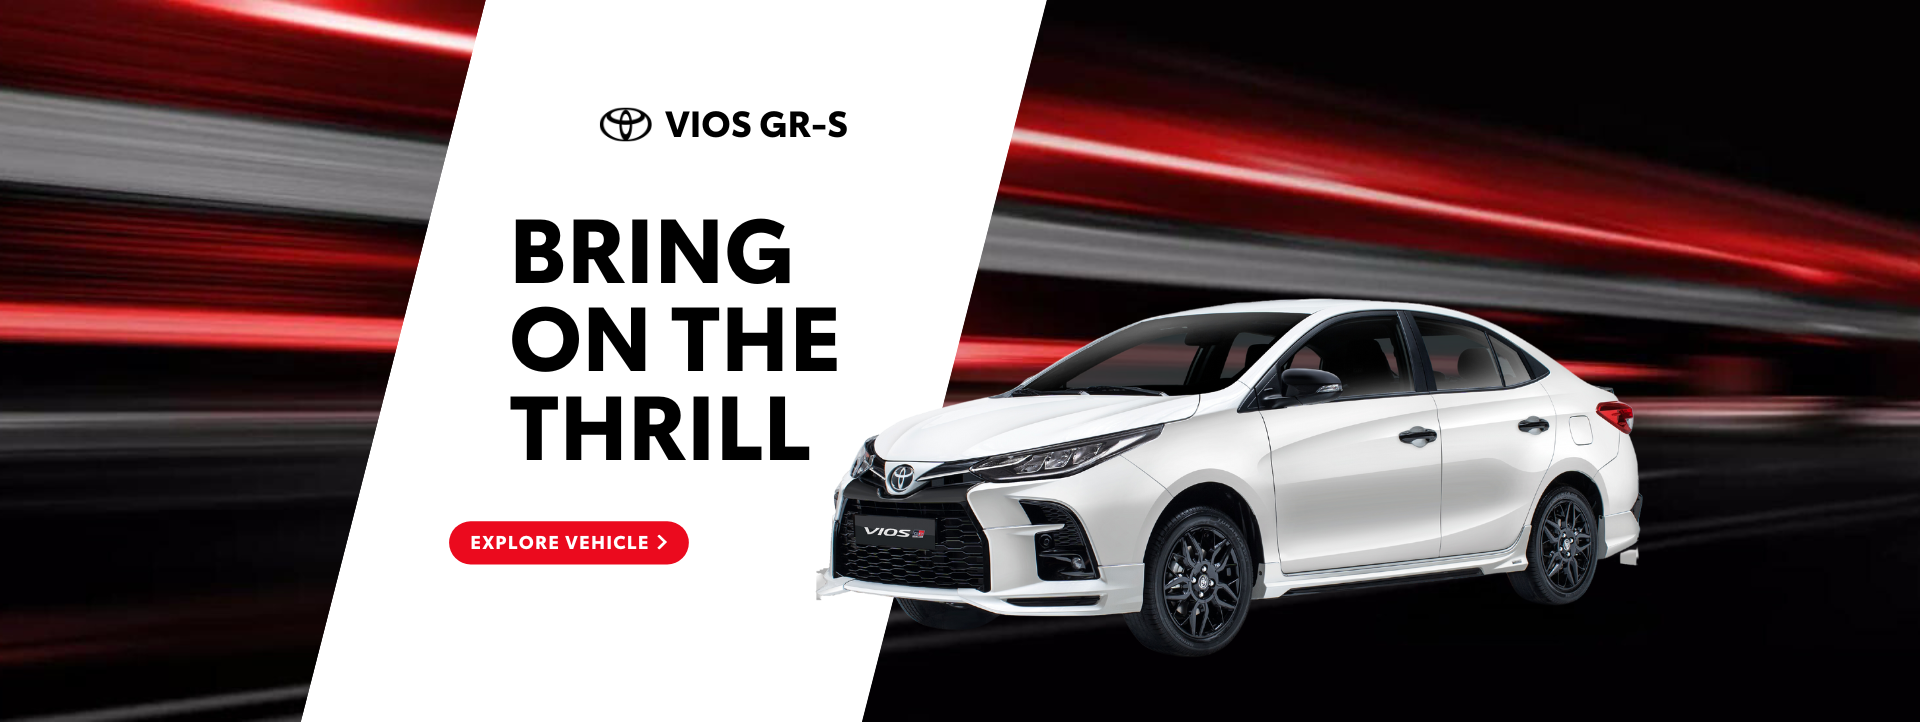 Vios GR-S | Bring on the Thrill